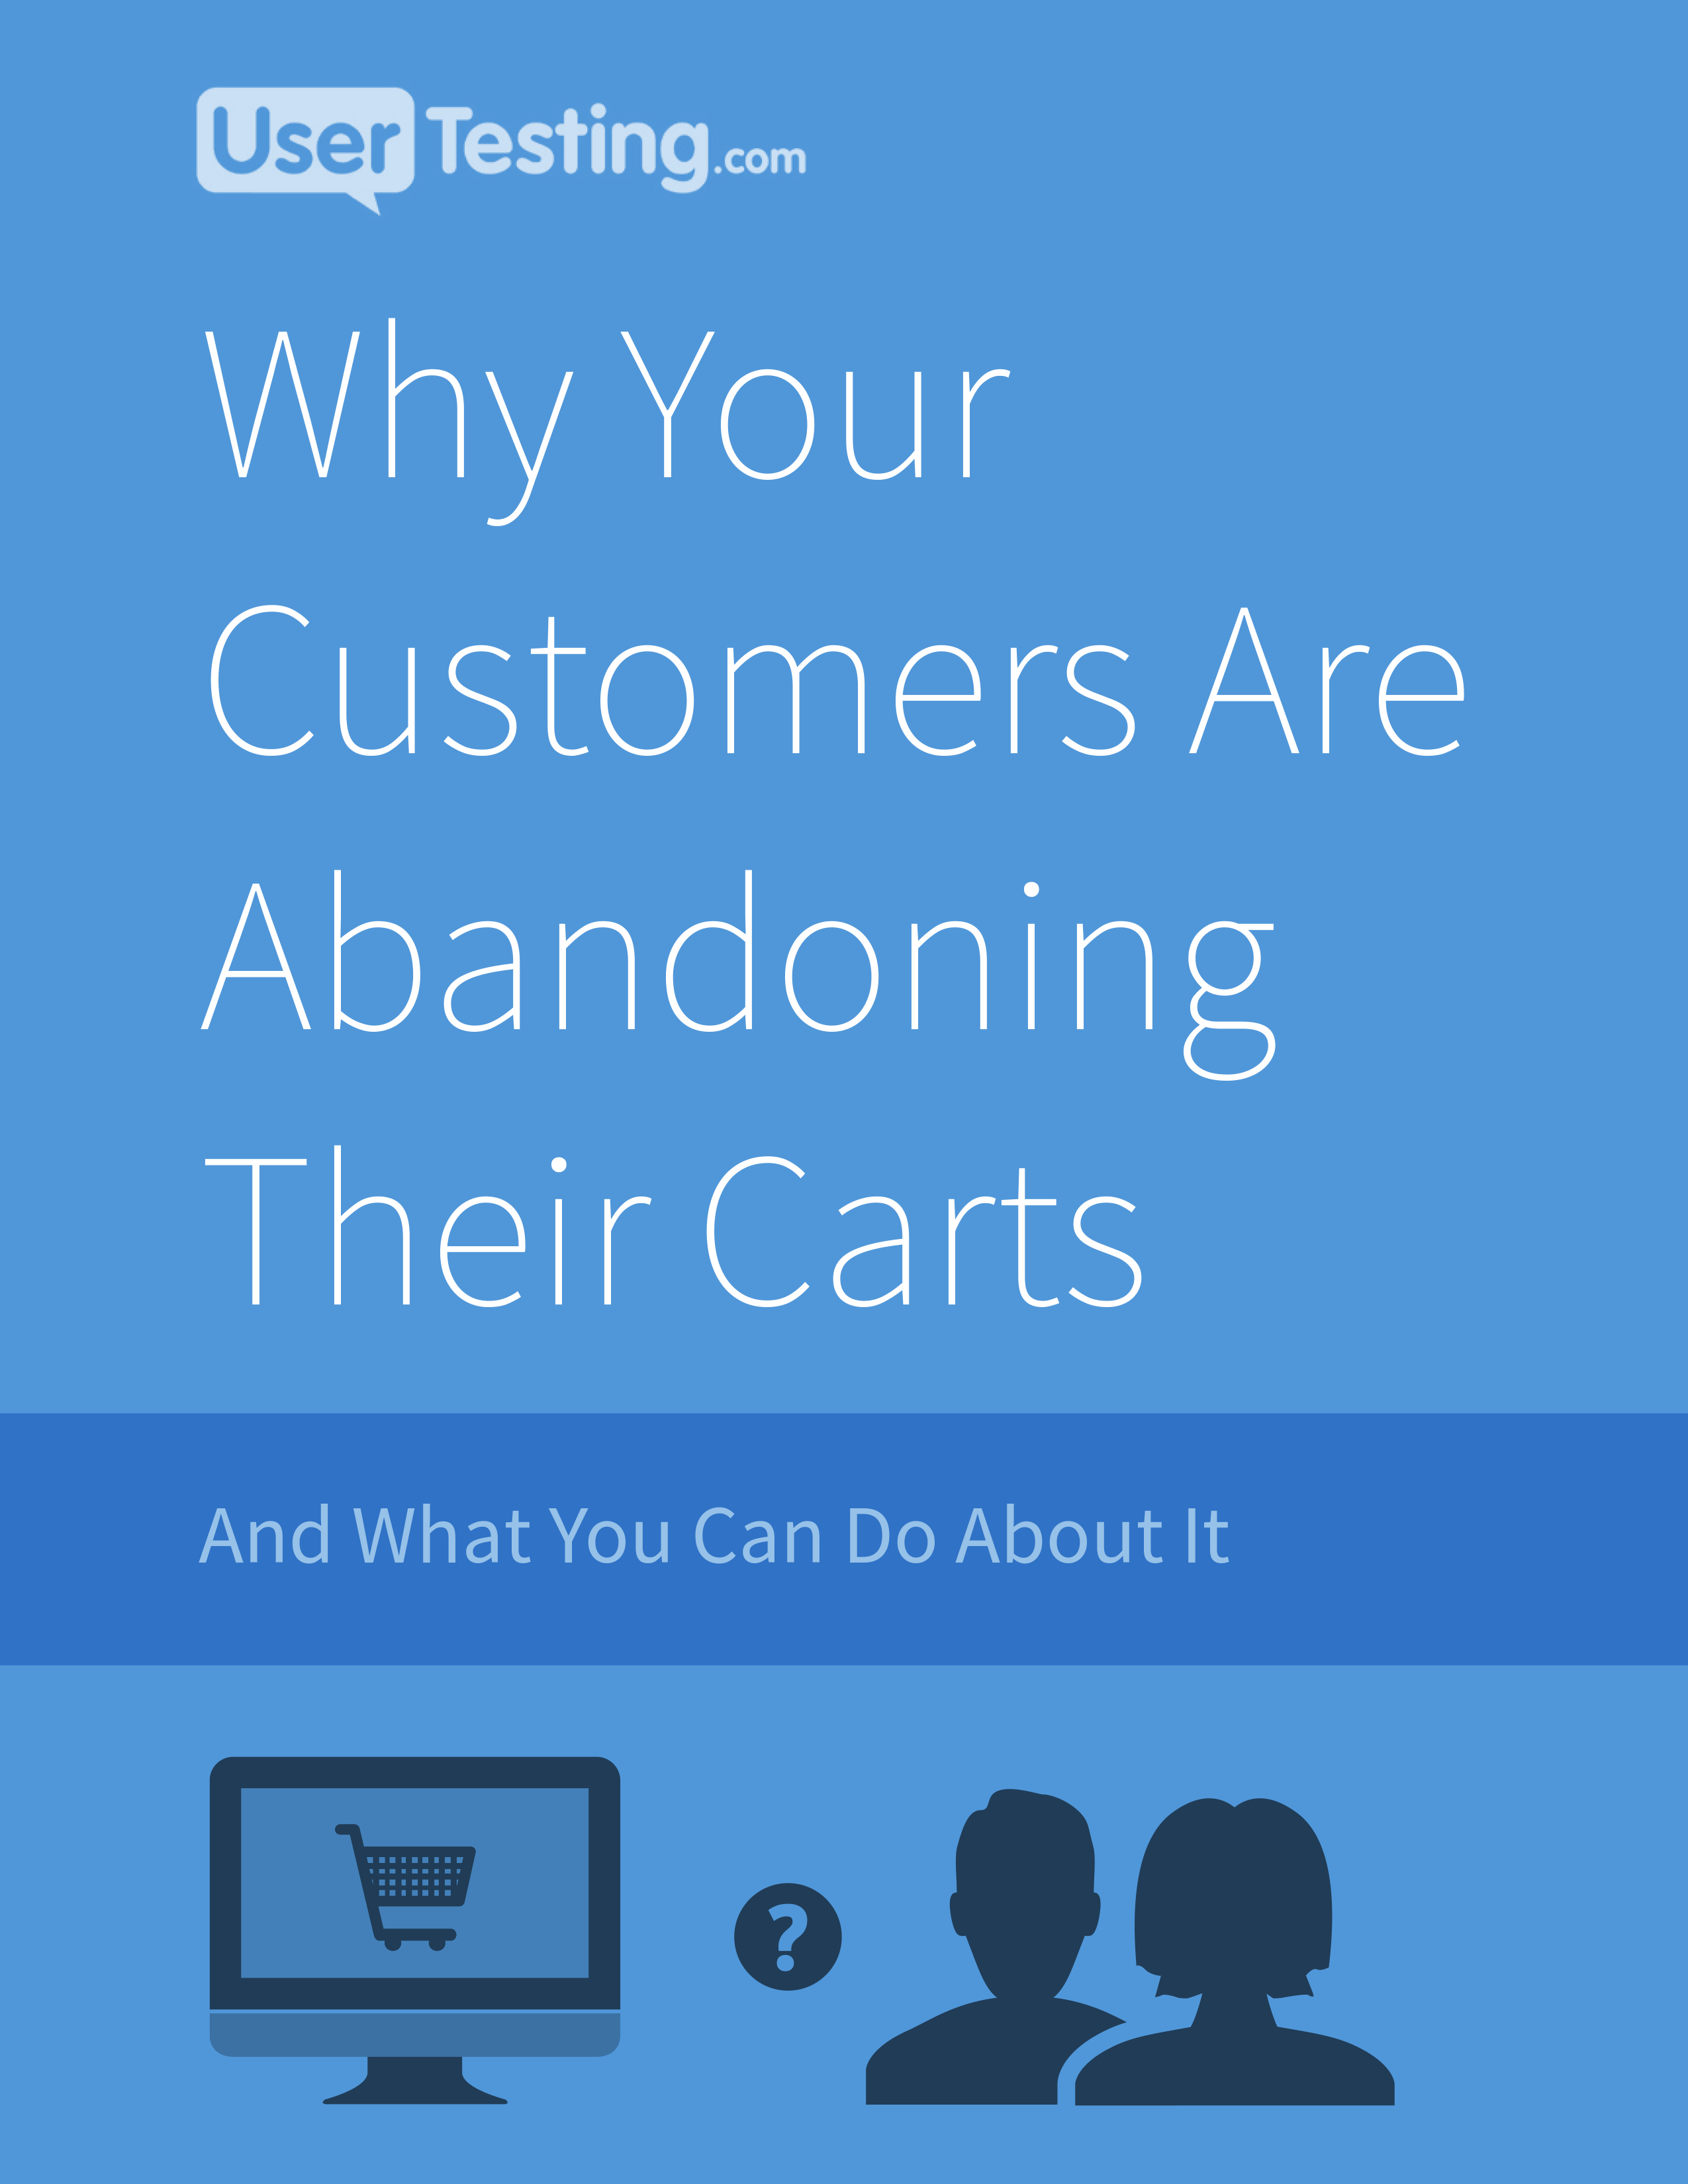 Free ebook: Why Your Customers Are Abandoning Their Carts (And What You Can Do About It)